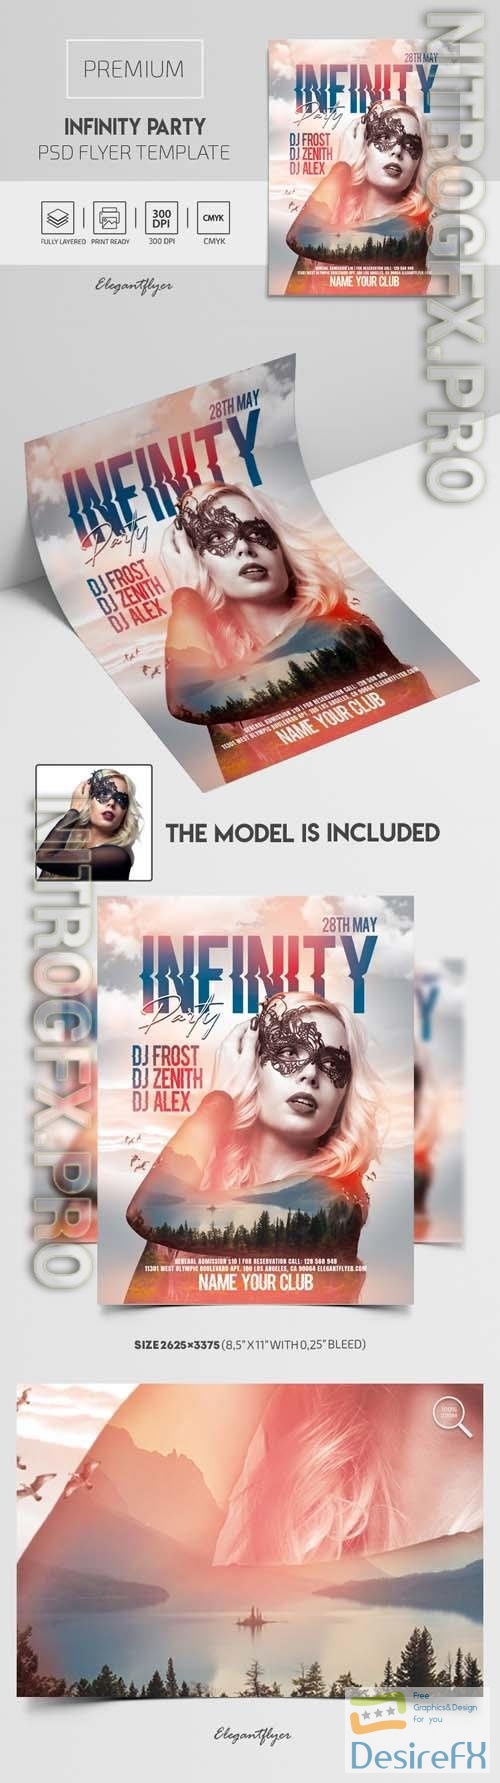 Infinity Party Flyer PSD Template